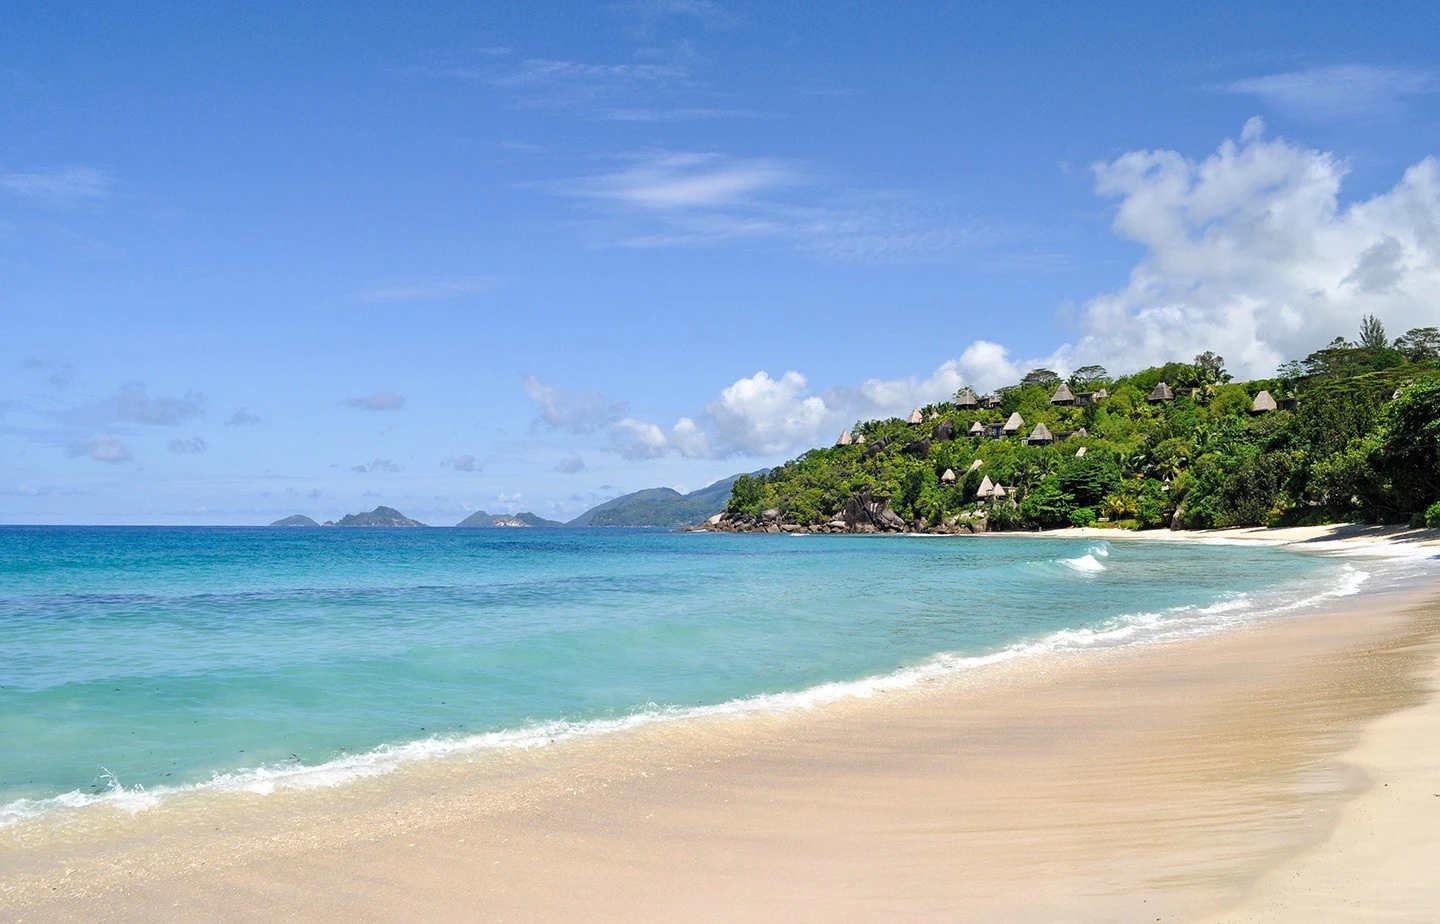 Golden sands at Anse Louis beach in the Seychelles